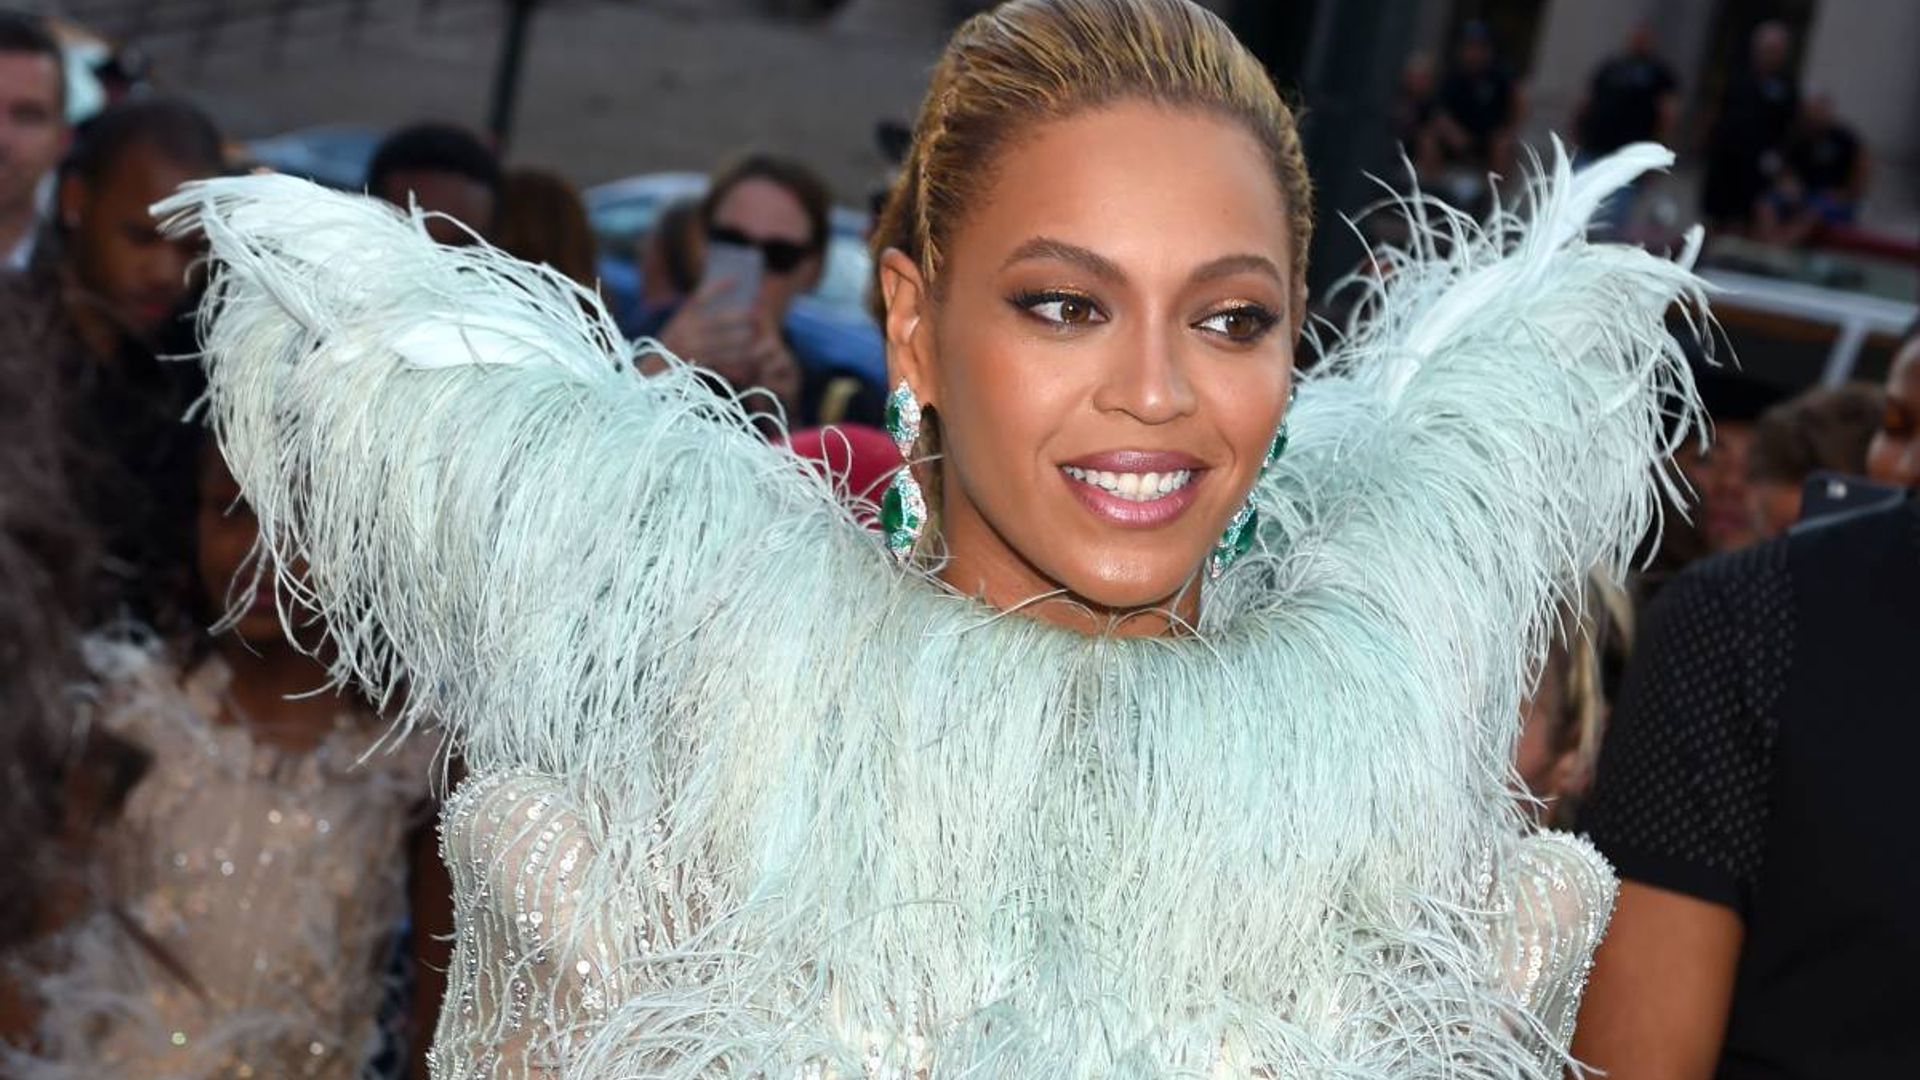 Beyoncé dazzles in a look no one saw coming during date night with Jay-Z